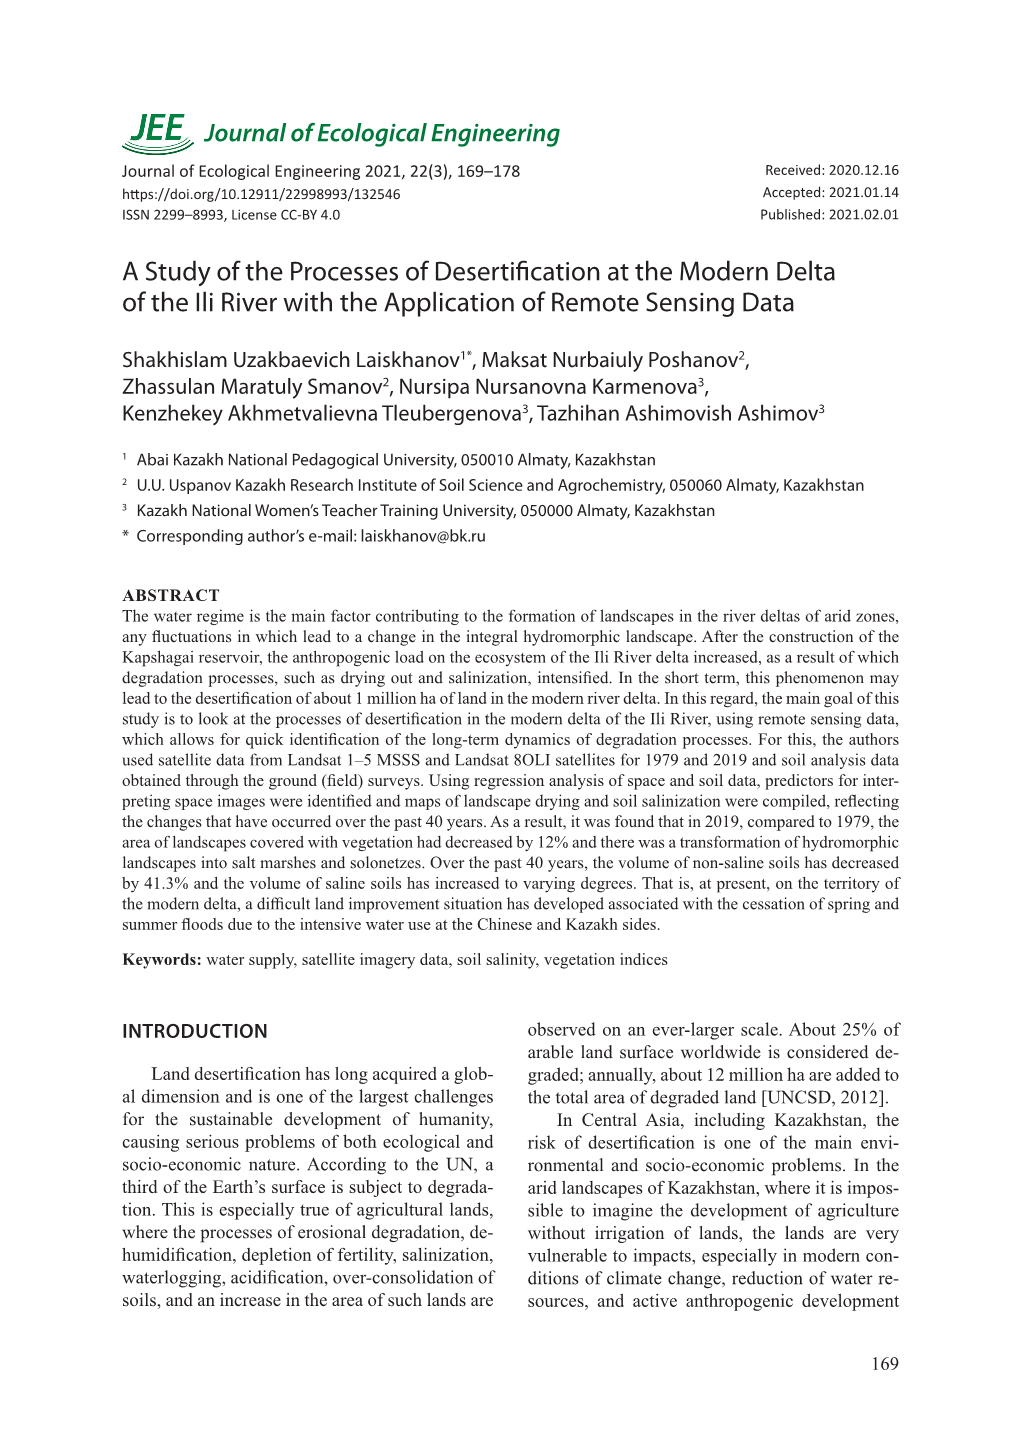 A Study of the Processes of Desertification at the Modern Delta of the Ili River with the Application of Remote Sensing Data